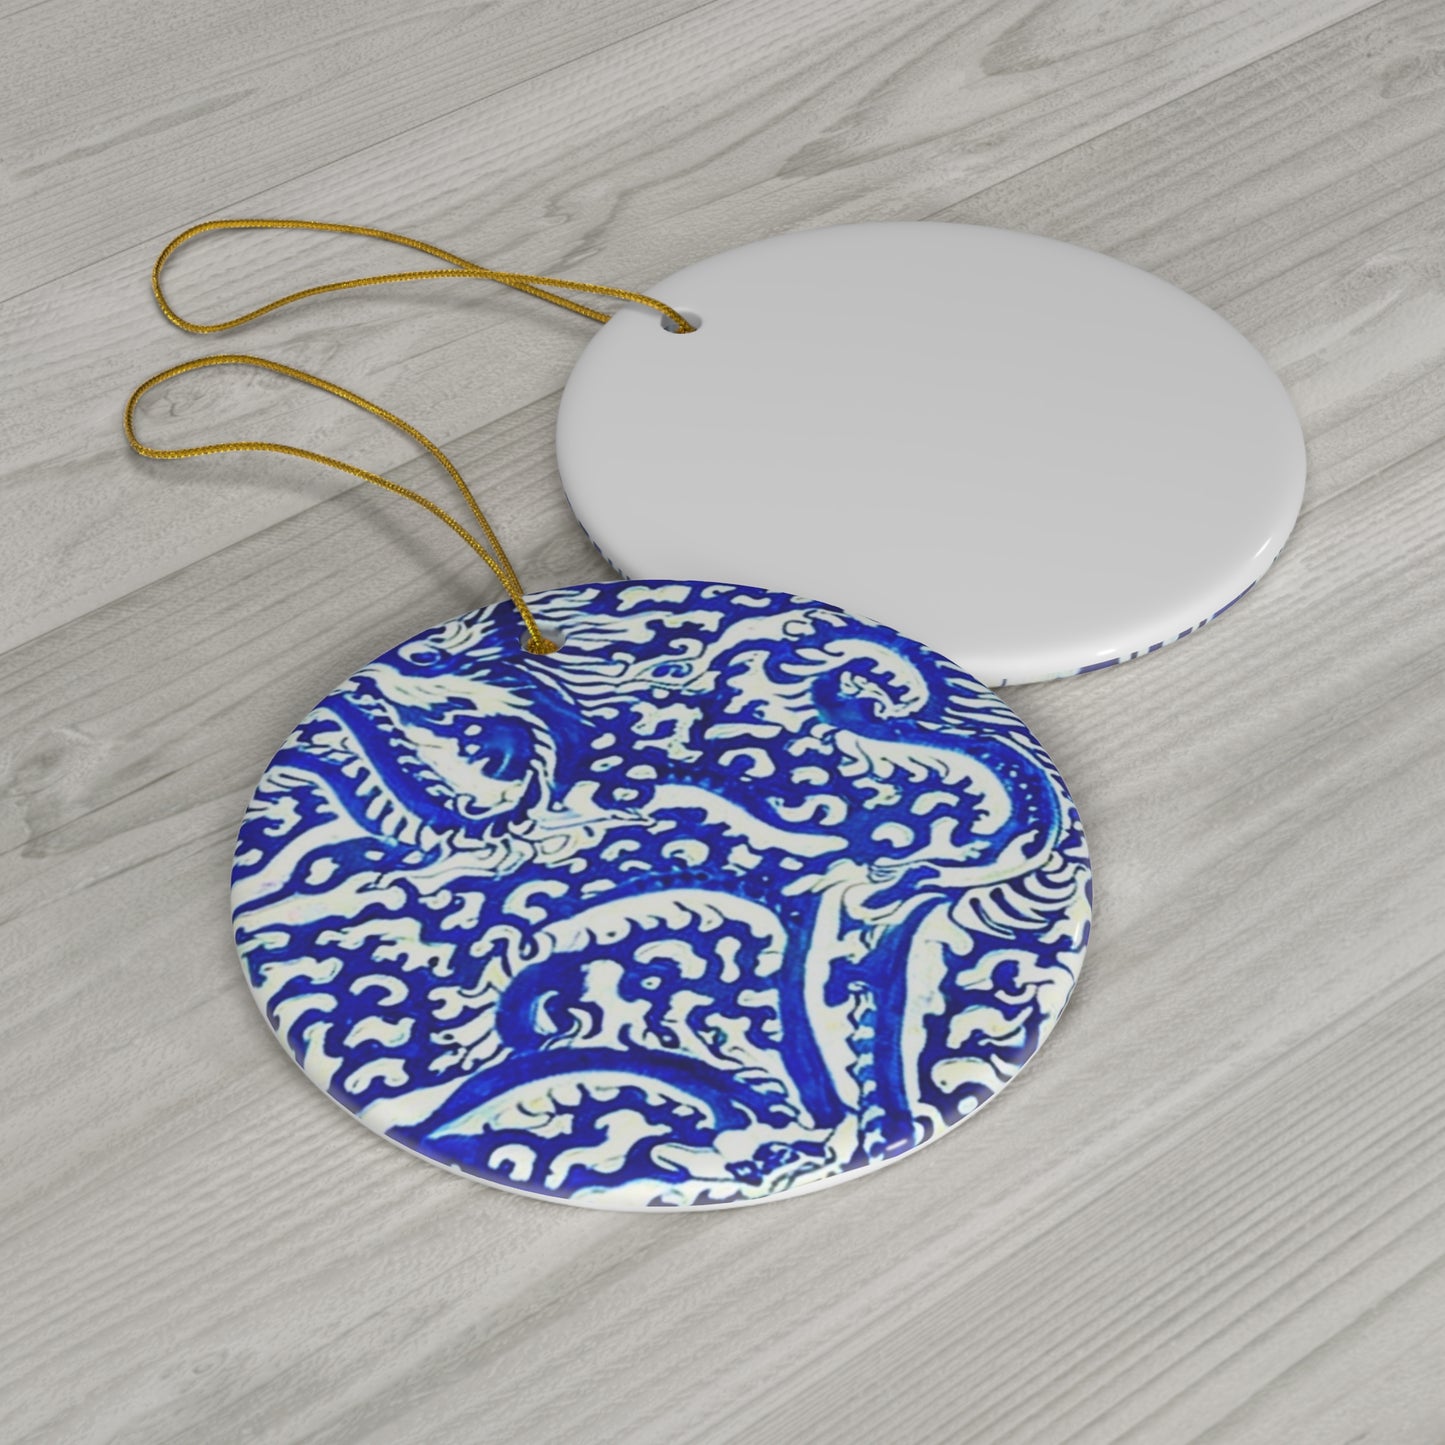 Sea of Chinese Dragons Ming Dynasty Blue and White Porcelain Pattern Ceramic Ornament